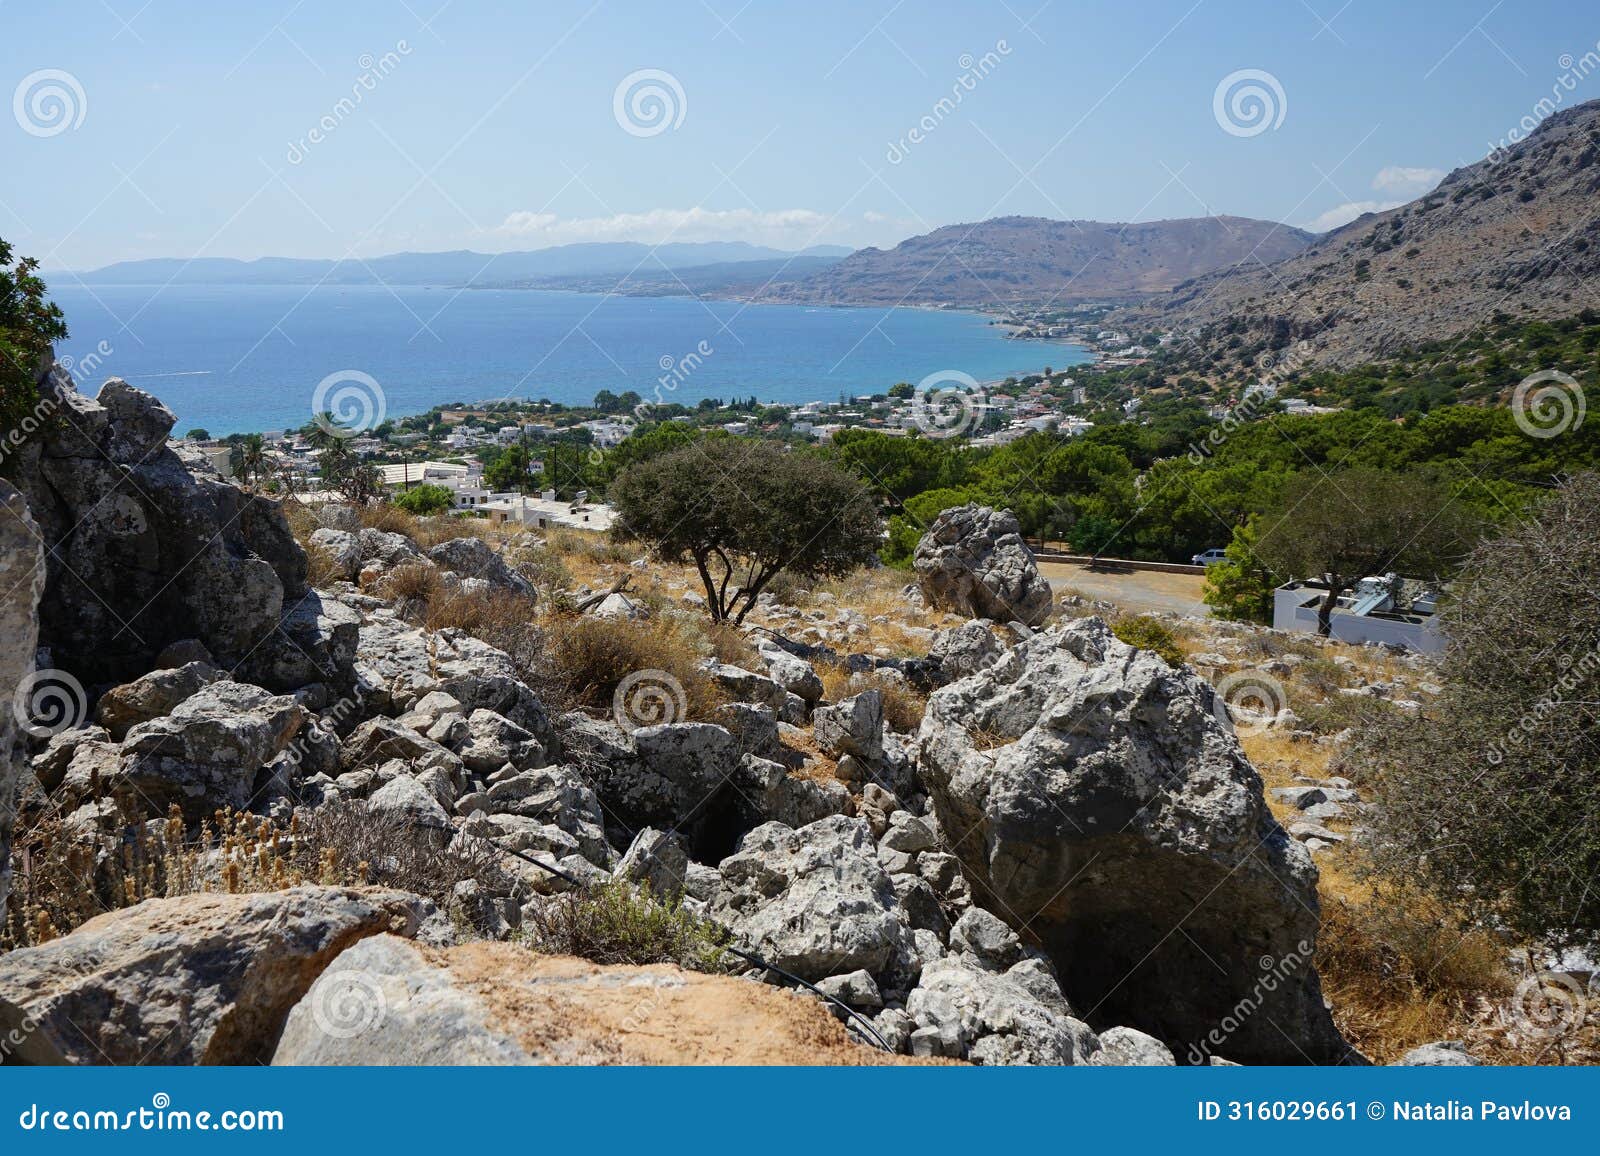 view of the mediterranean coast in the vicinity of pefki in august. pefkos or pefki, rhodes island, greece